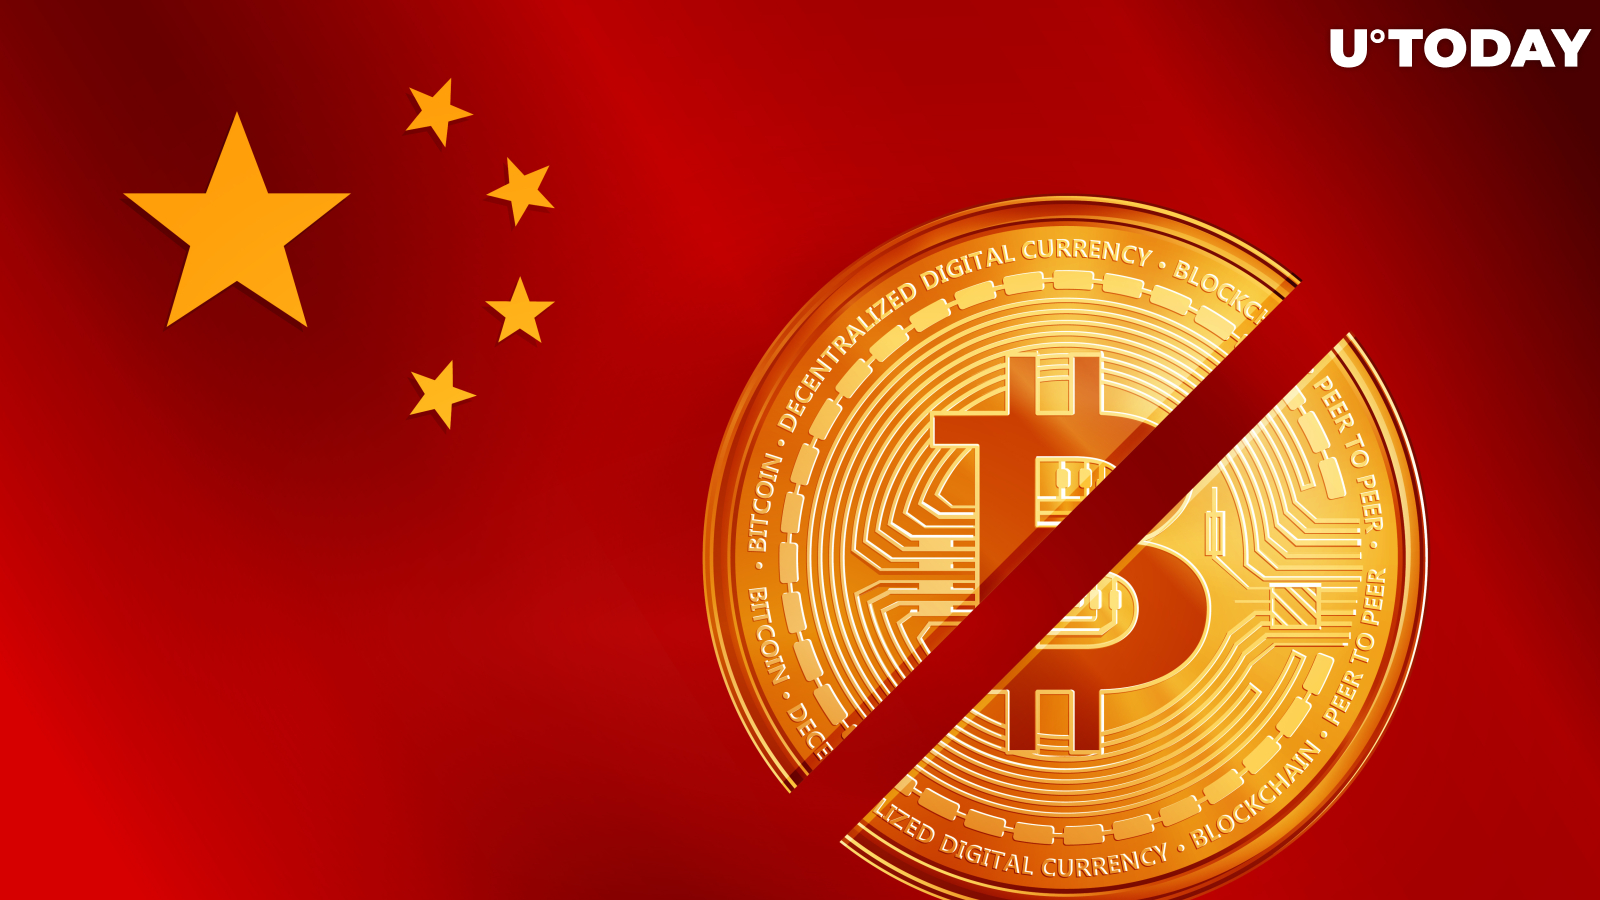 Crypto Exchange Founder Arrested in China, Withdrawals Suspended: Details